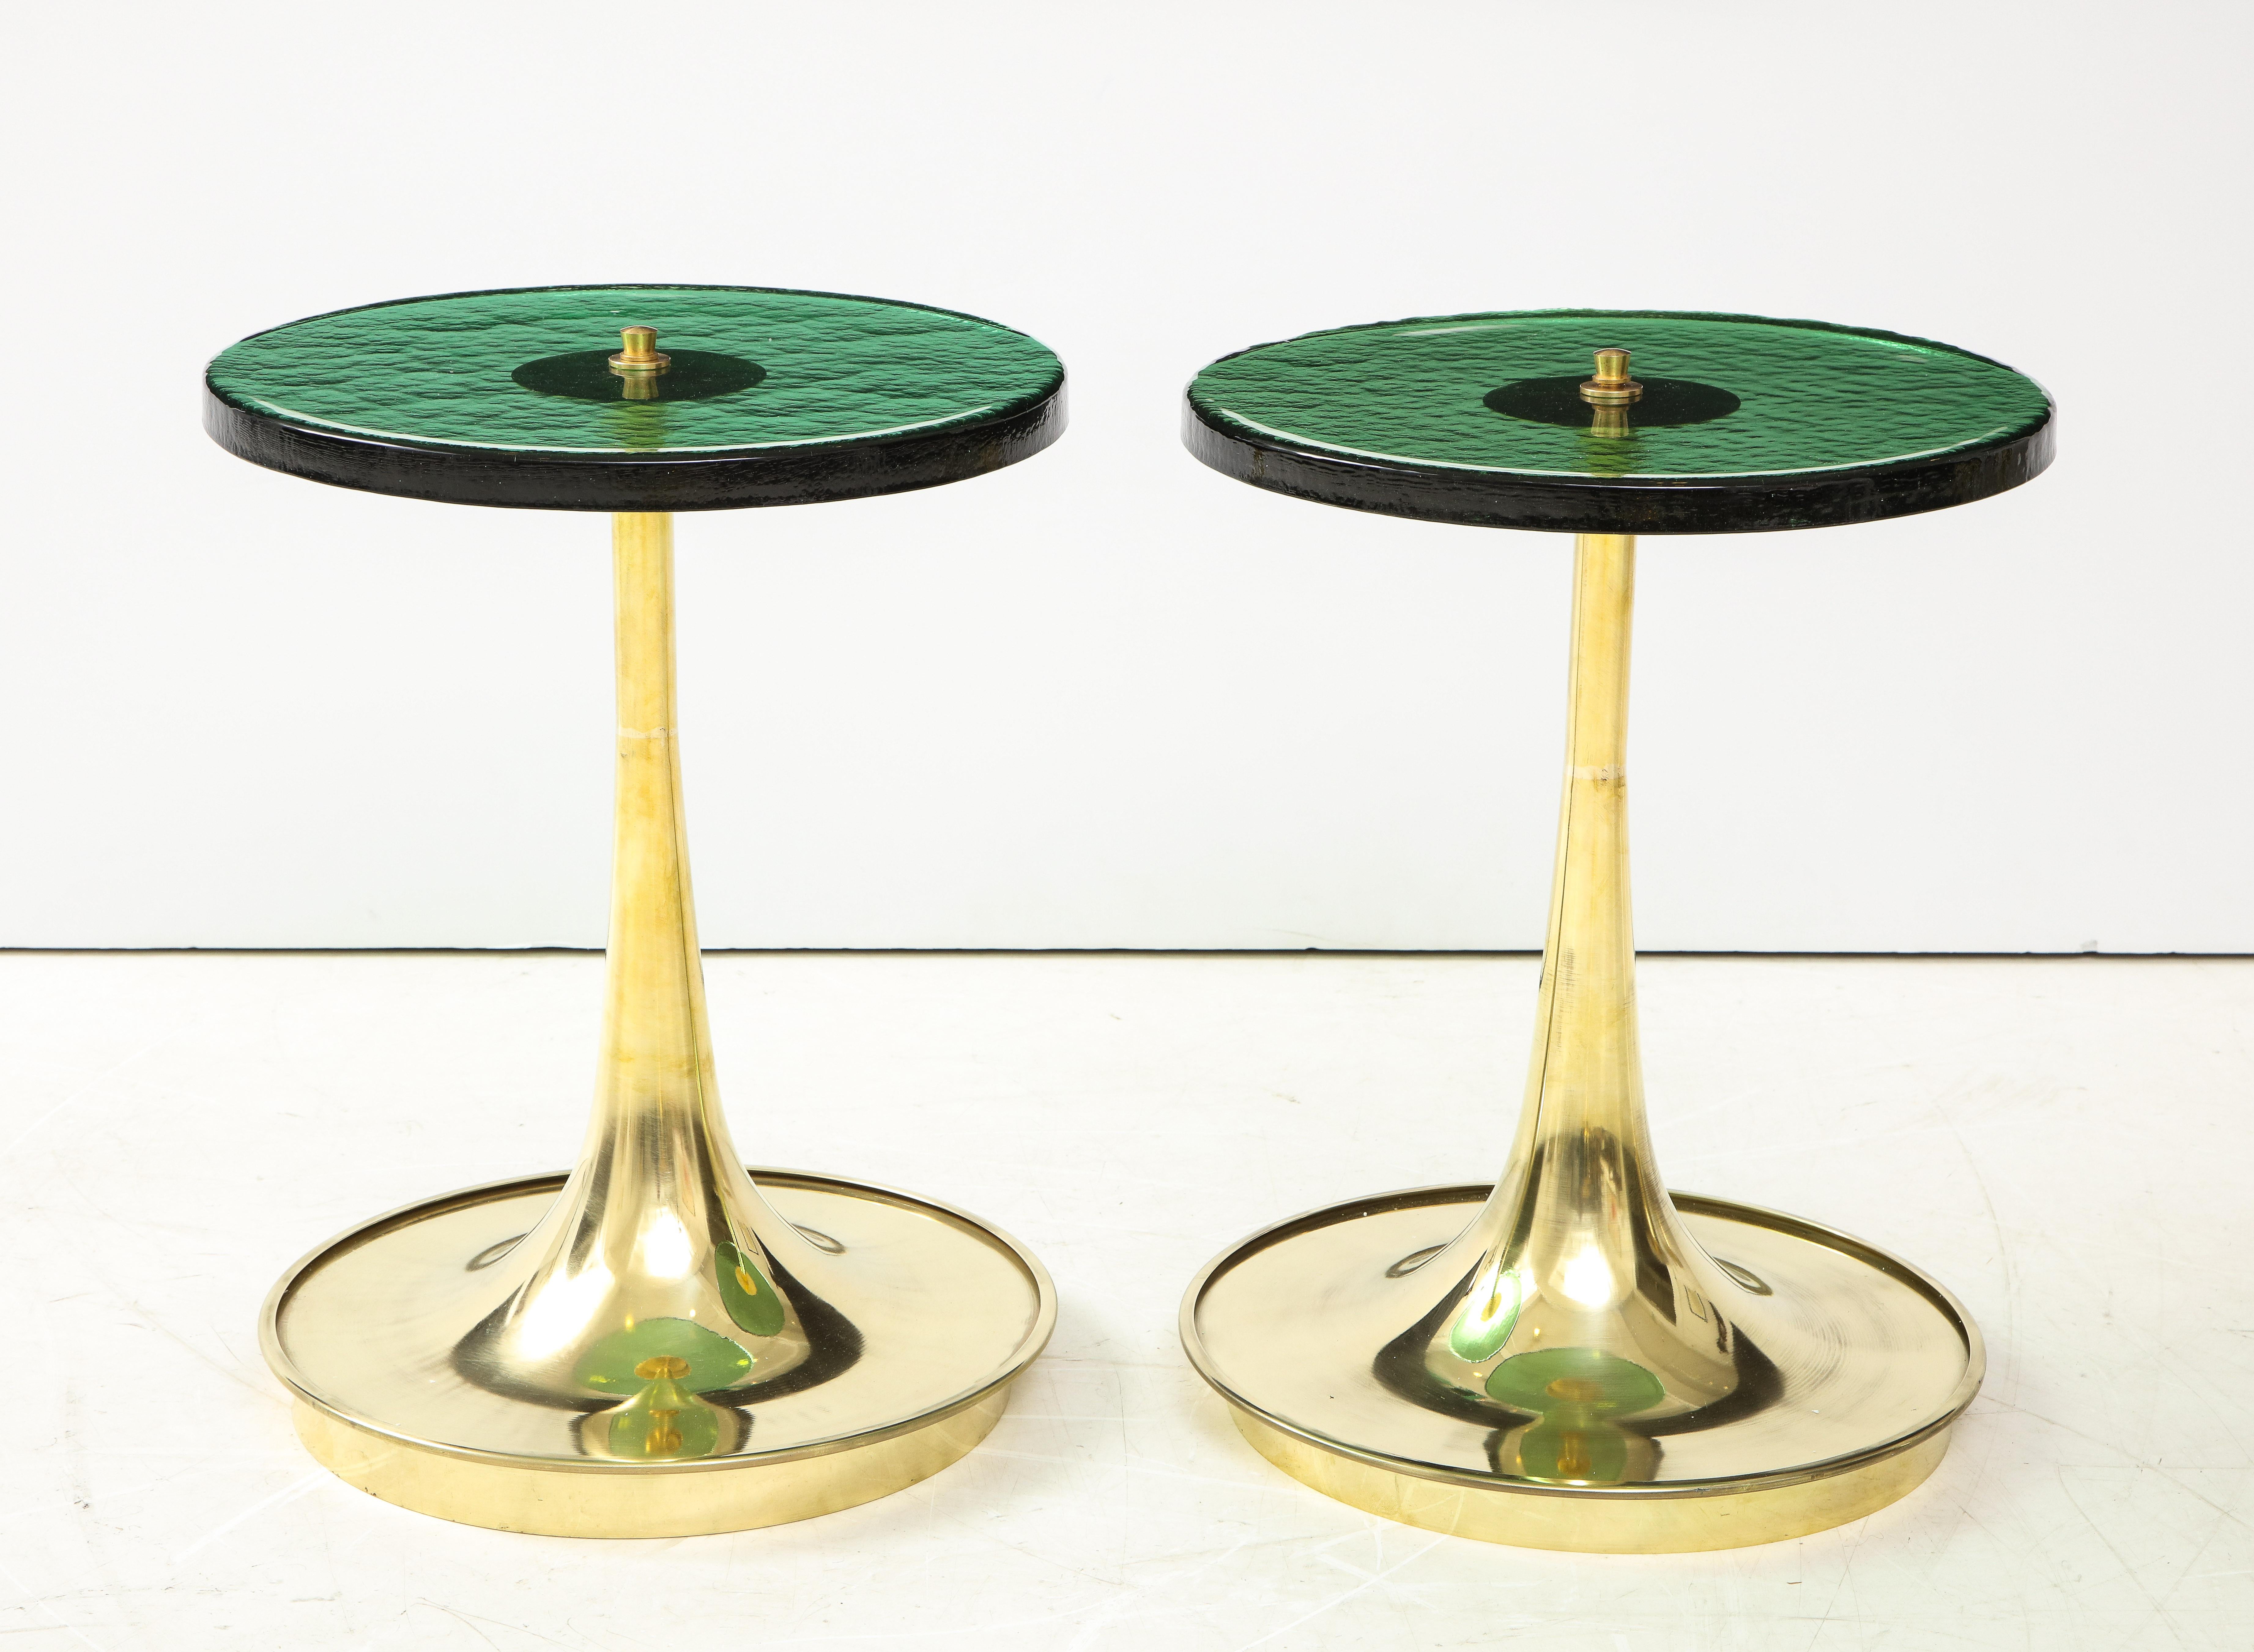 Hand-Crafted Pair of Round Emerald Green Murano Glass and Brass Martini Tables, Italy, 2021